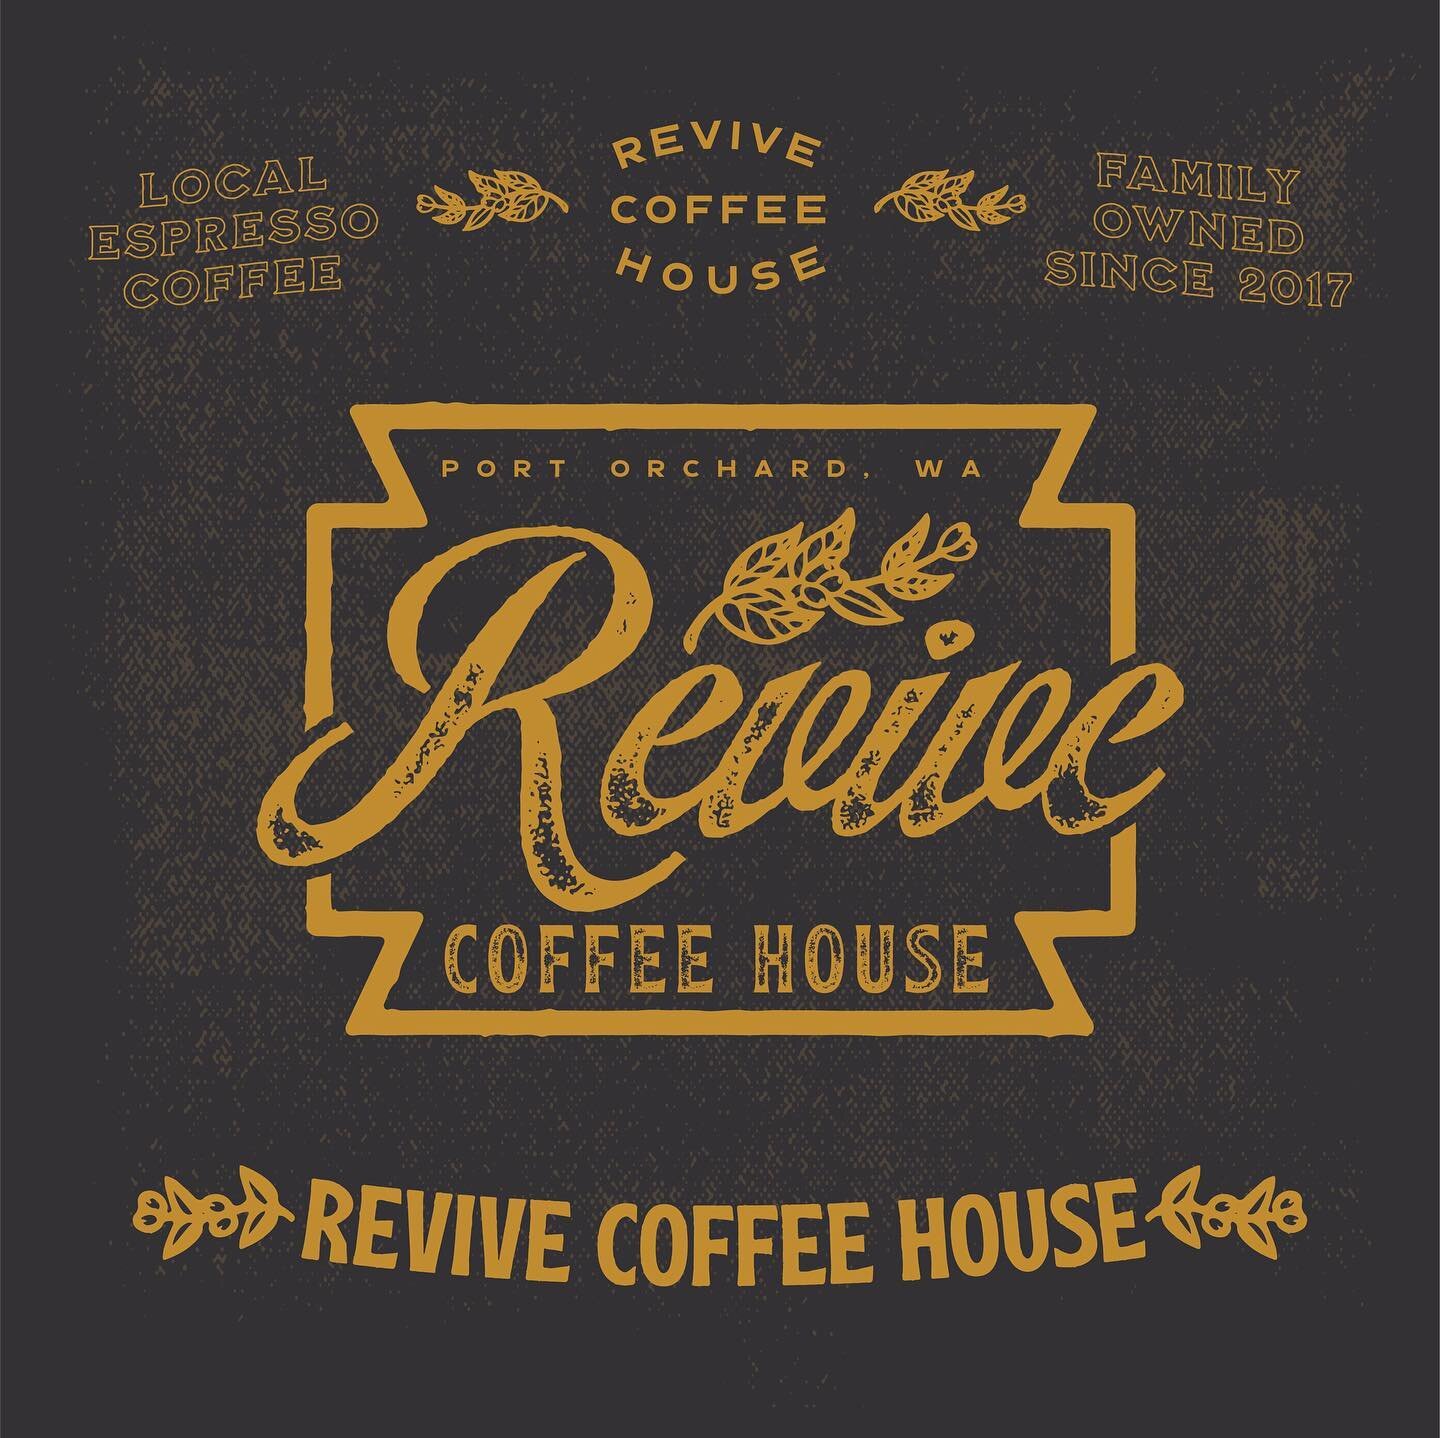 Fresh Rebrand for Revive Coffee
&mdash;&mdash;
Beyond excited to show off this work along with new menus and signage for @revive.coffeehouse 
&mdash;&mdash;
&bull;
&bull;
&bull;
&bull;
&bull;
#portorchardwashington #kitsappeninsula #branddesign #logo